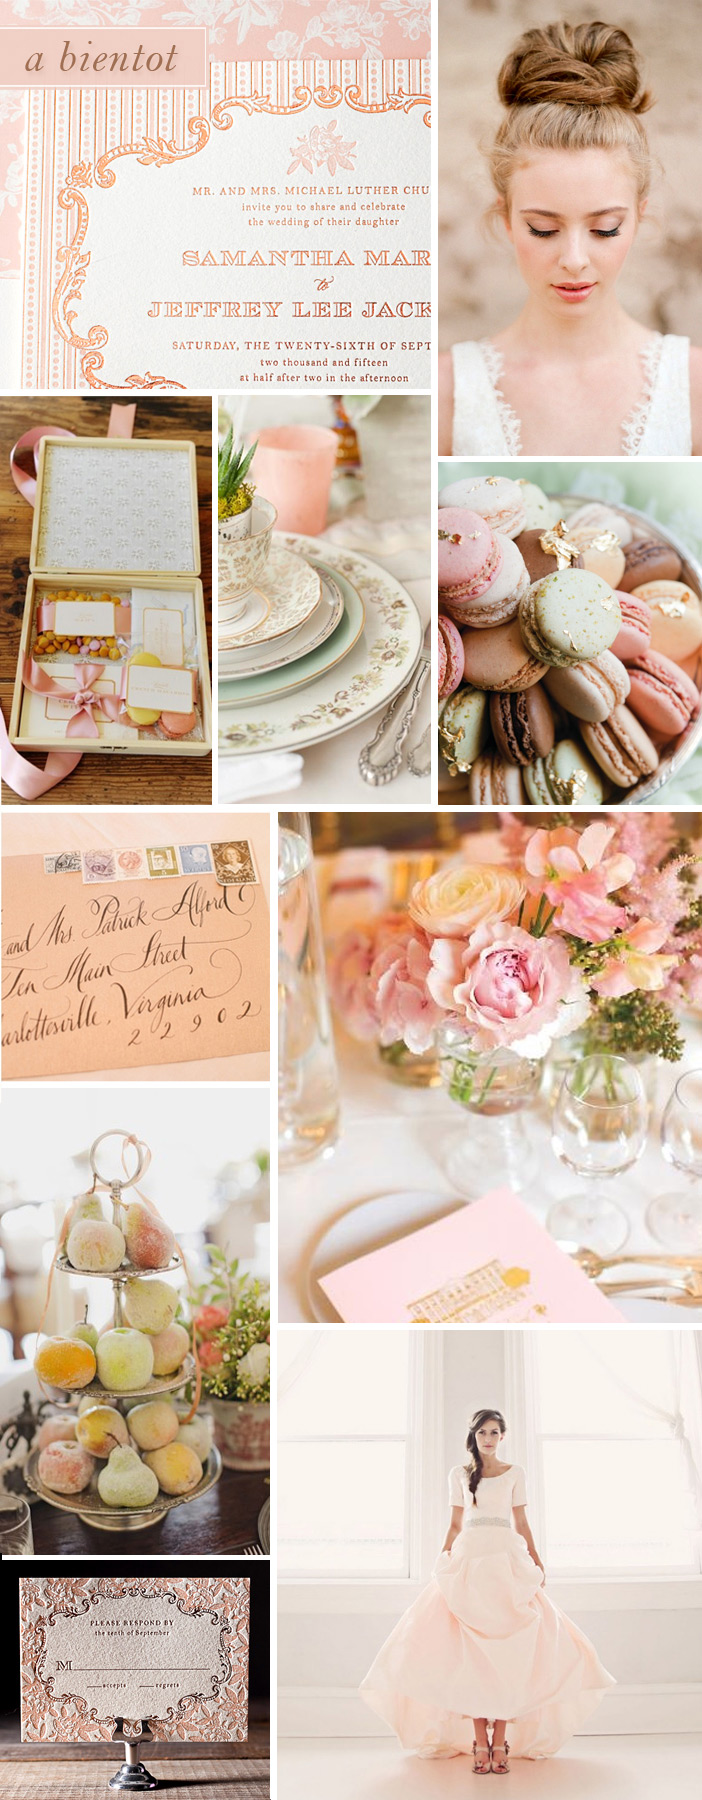 A Bientot is a romantic invitation with Parisian flair, designed by Jessica Tierney for Bella FIgura